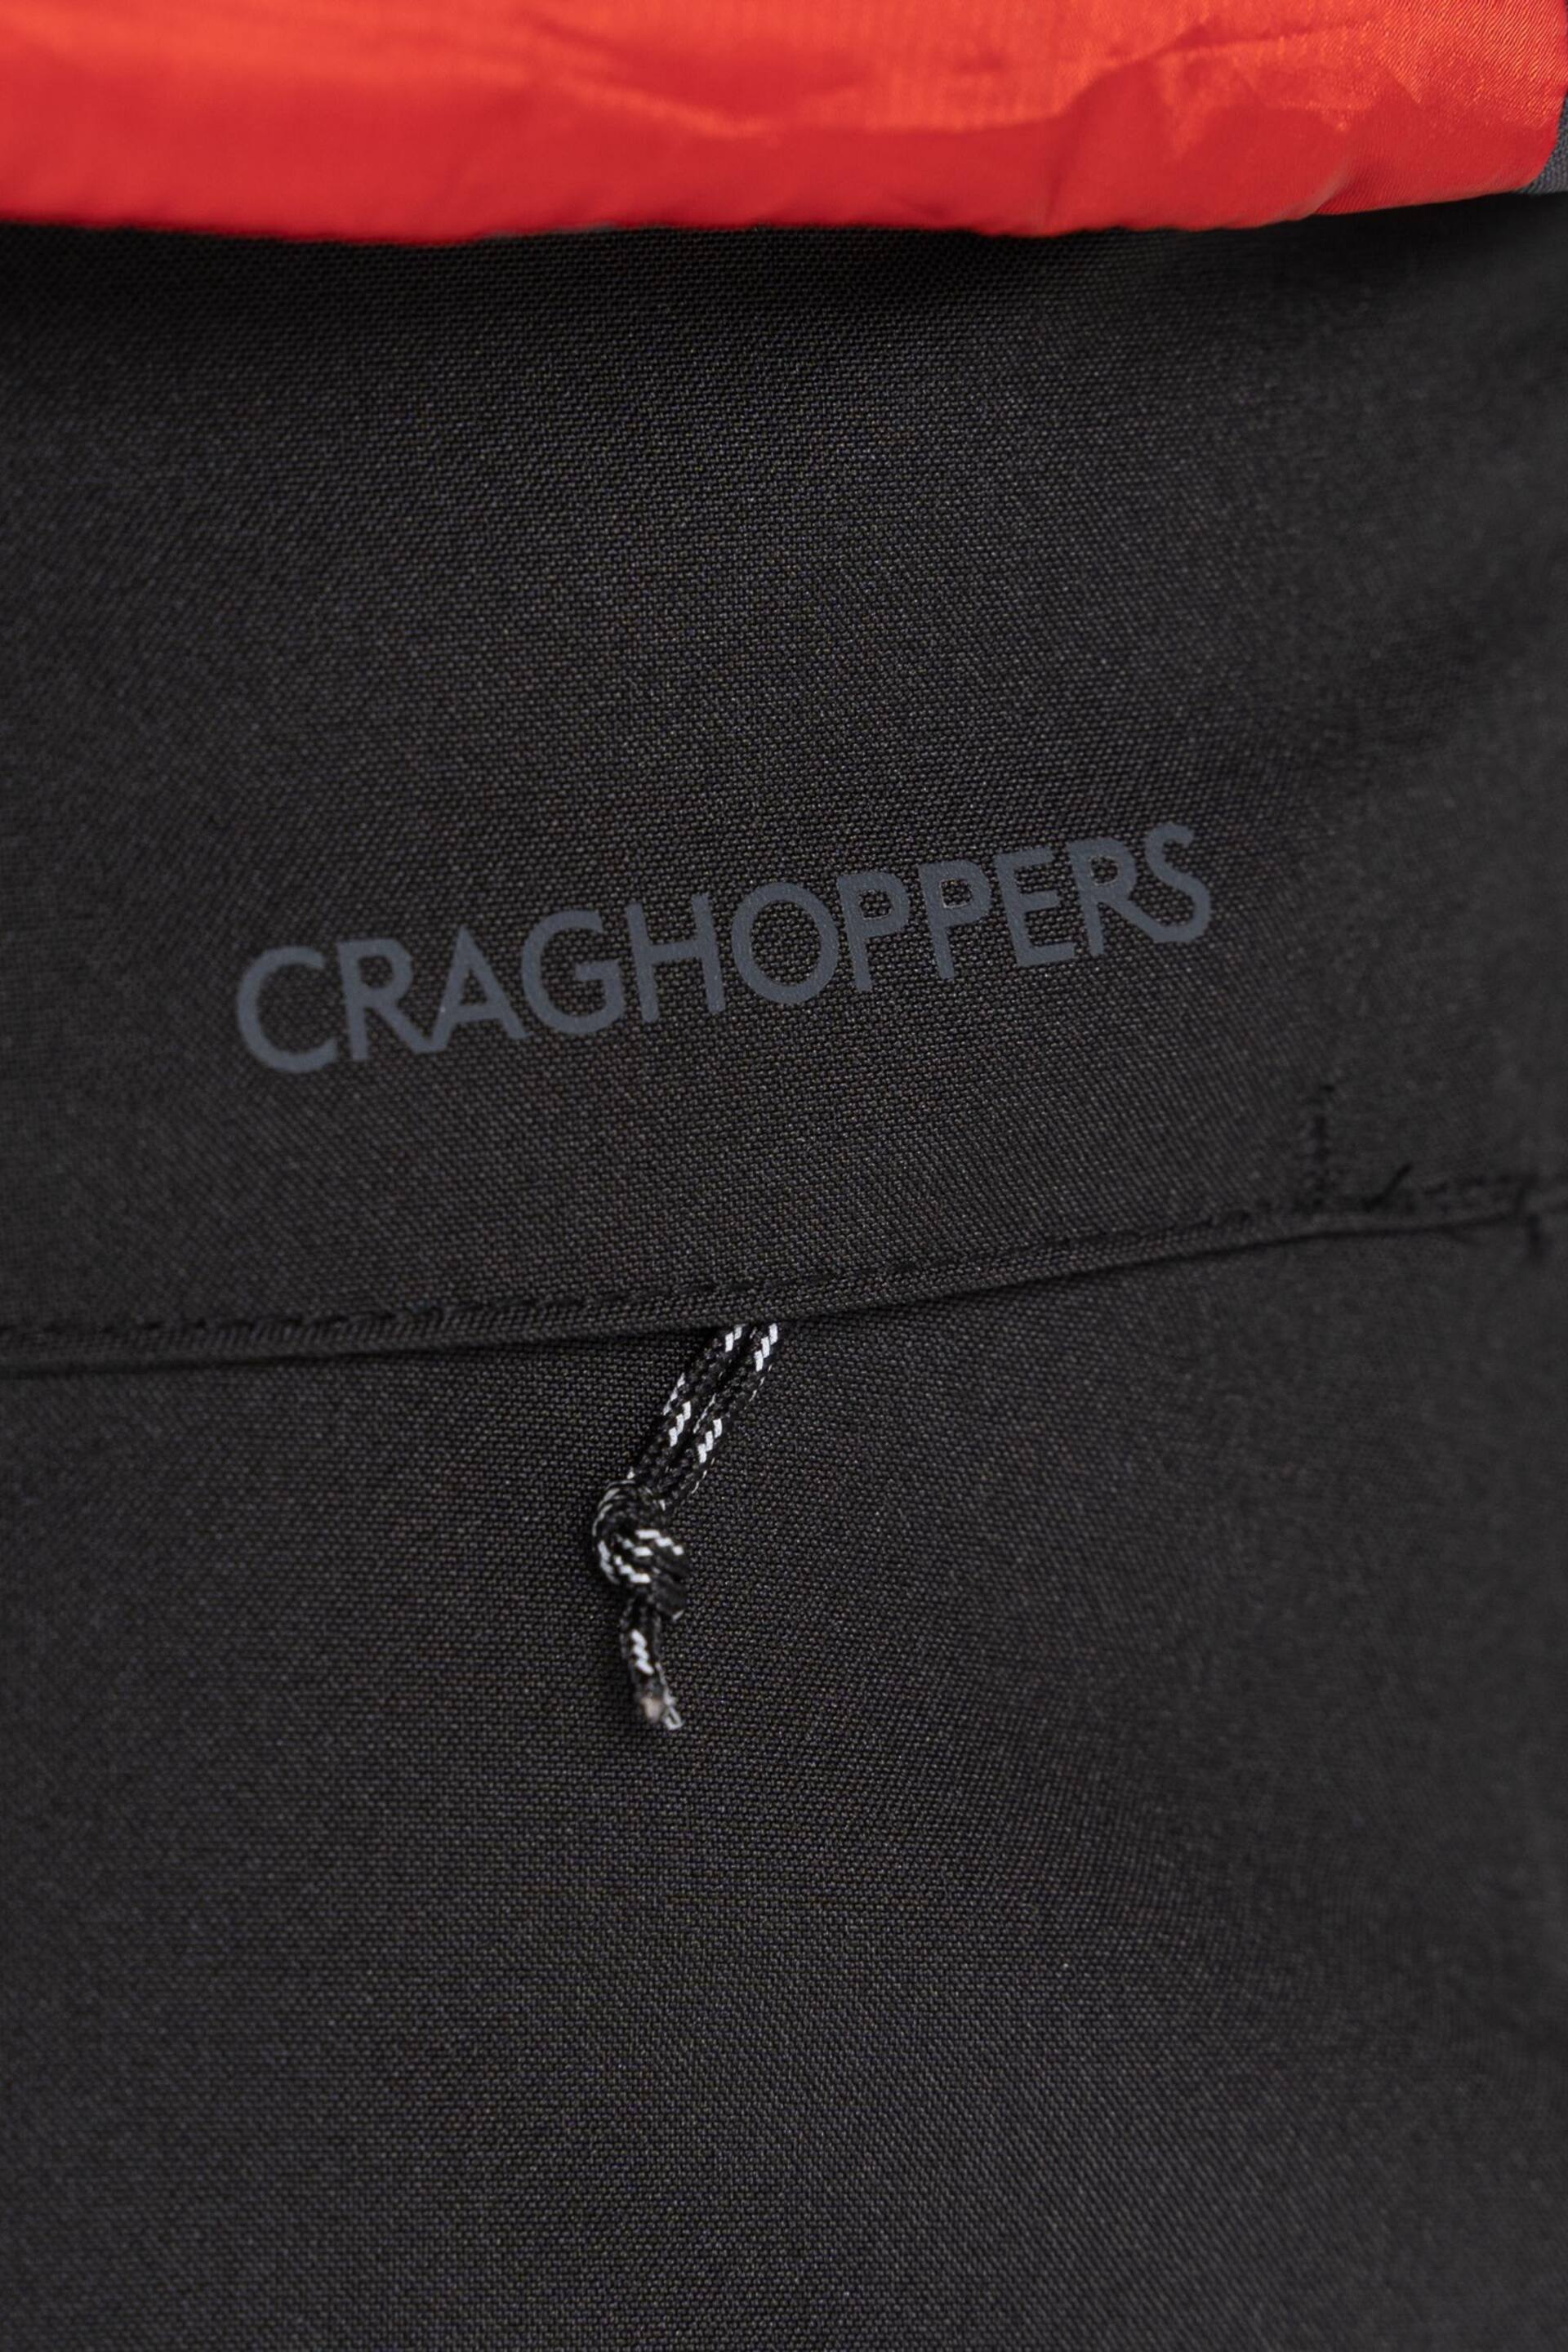 Craghoppers Steall Thermo Black Trousers - Image 6 of 7